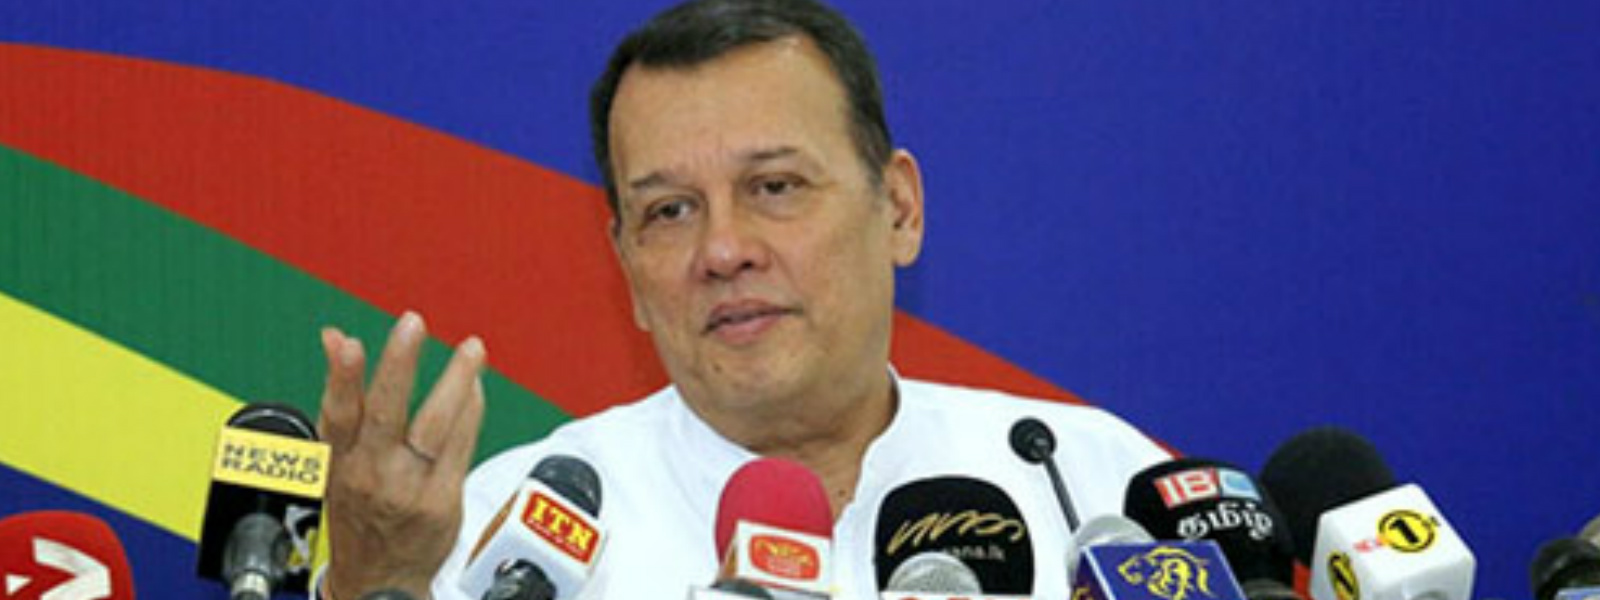 Prior notice was not given about NCM- Samarasinghe